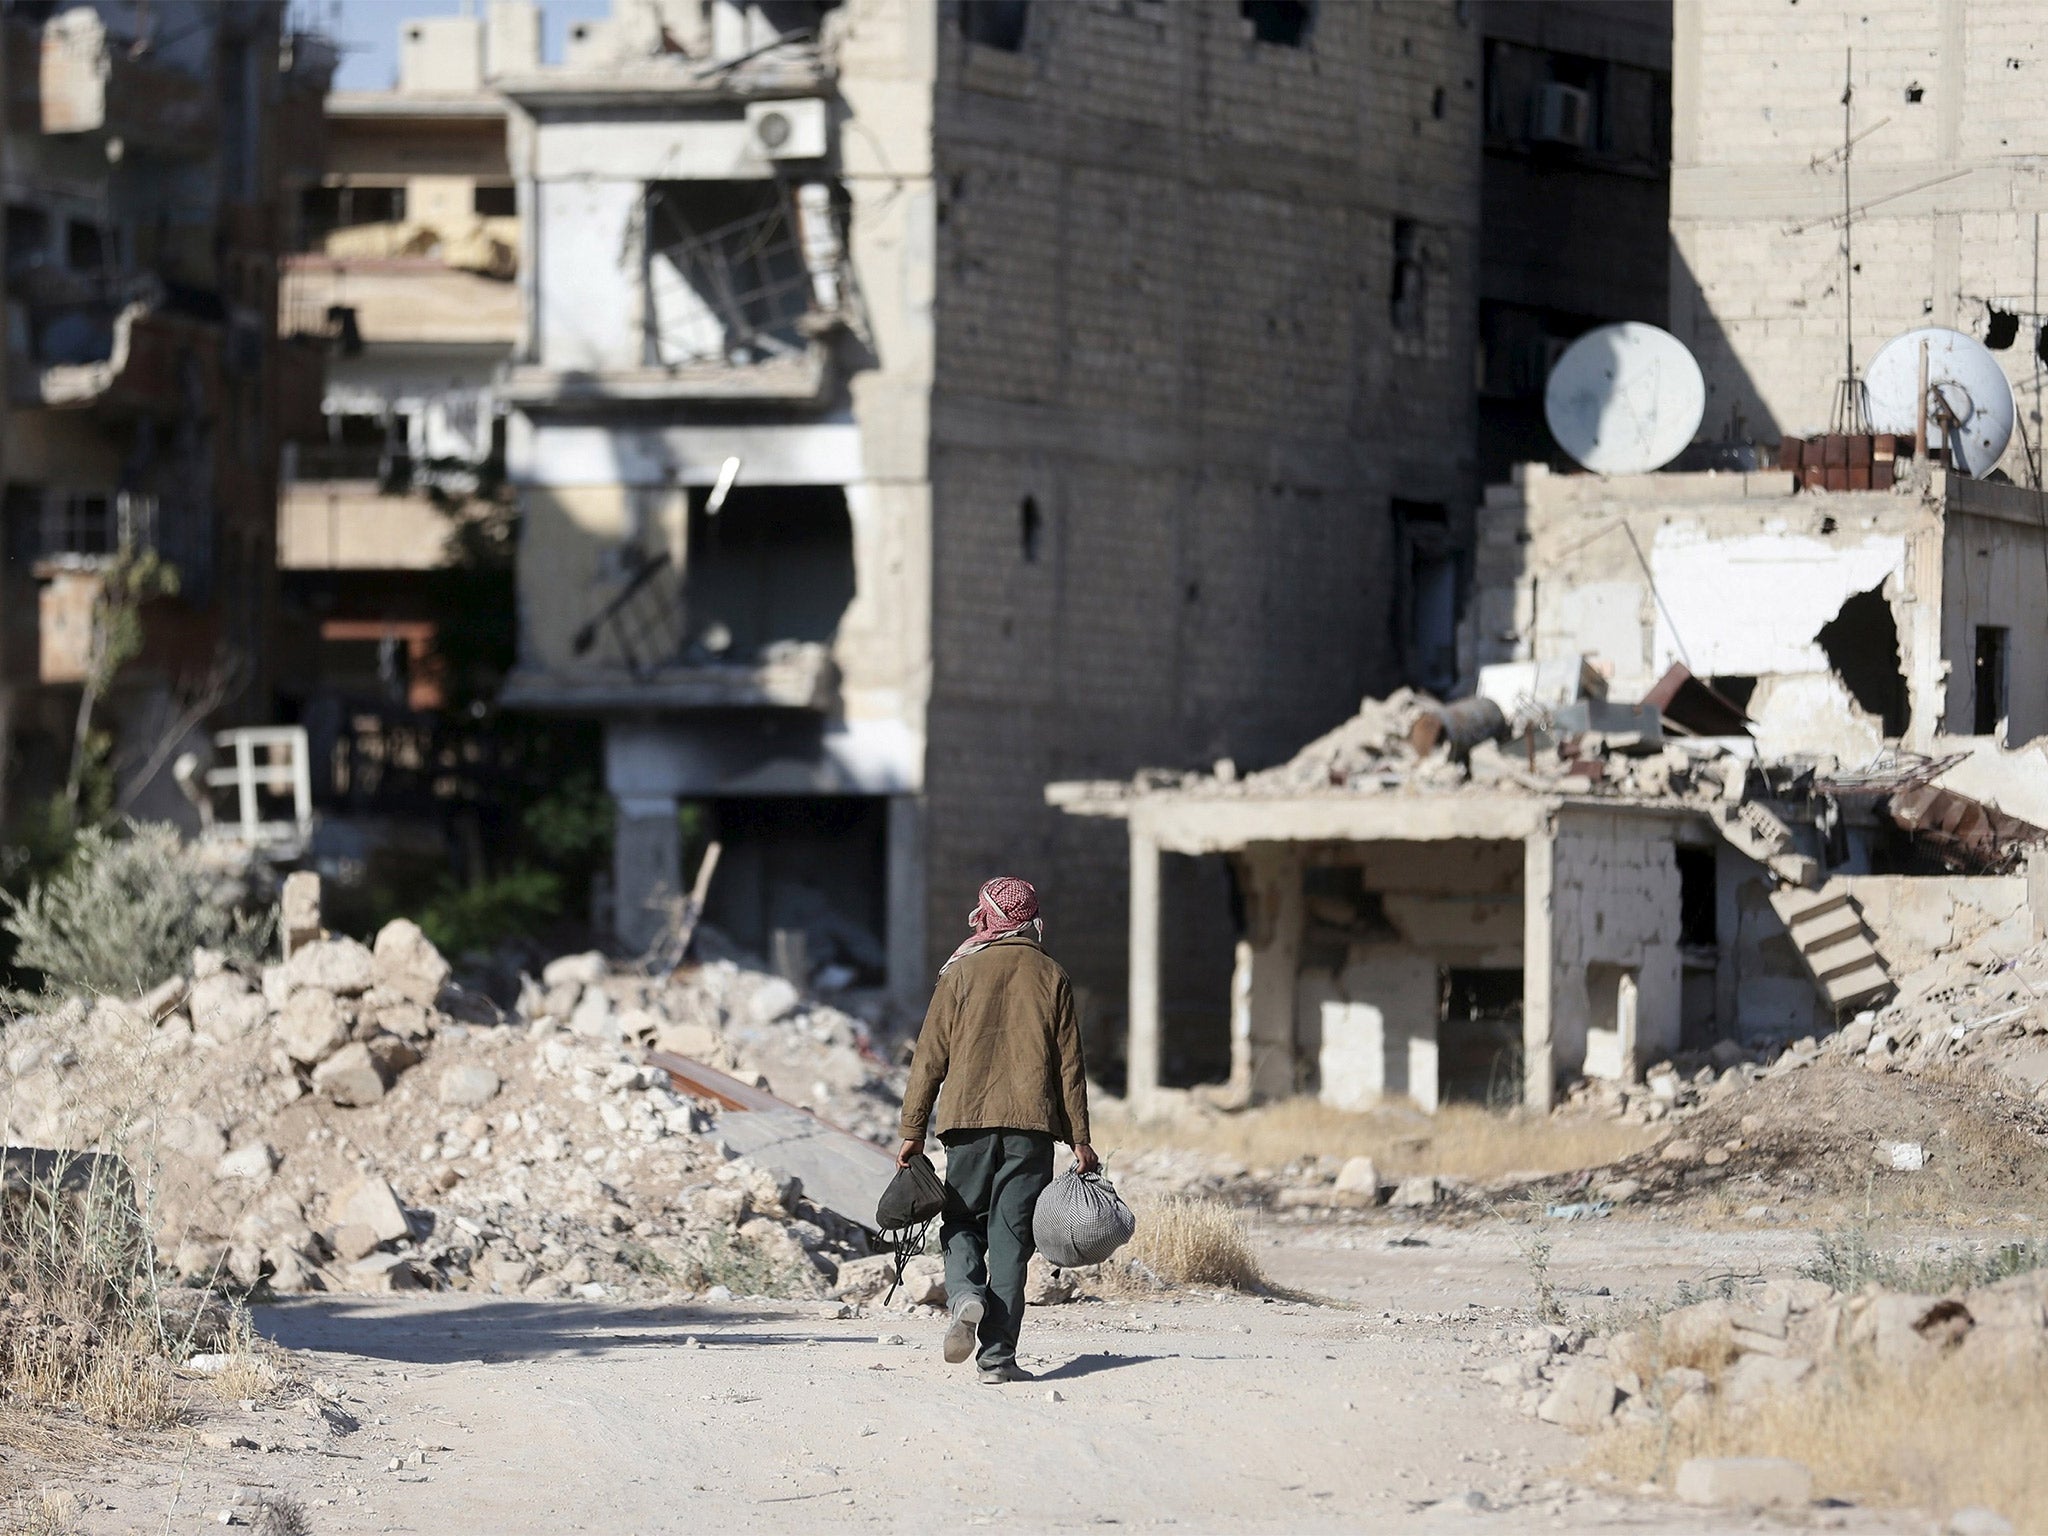 Much of Syria has been decimated by the conflict